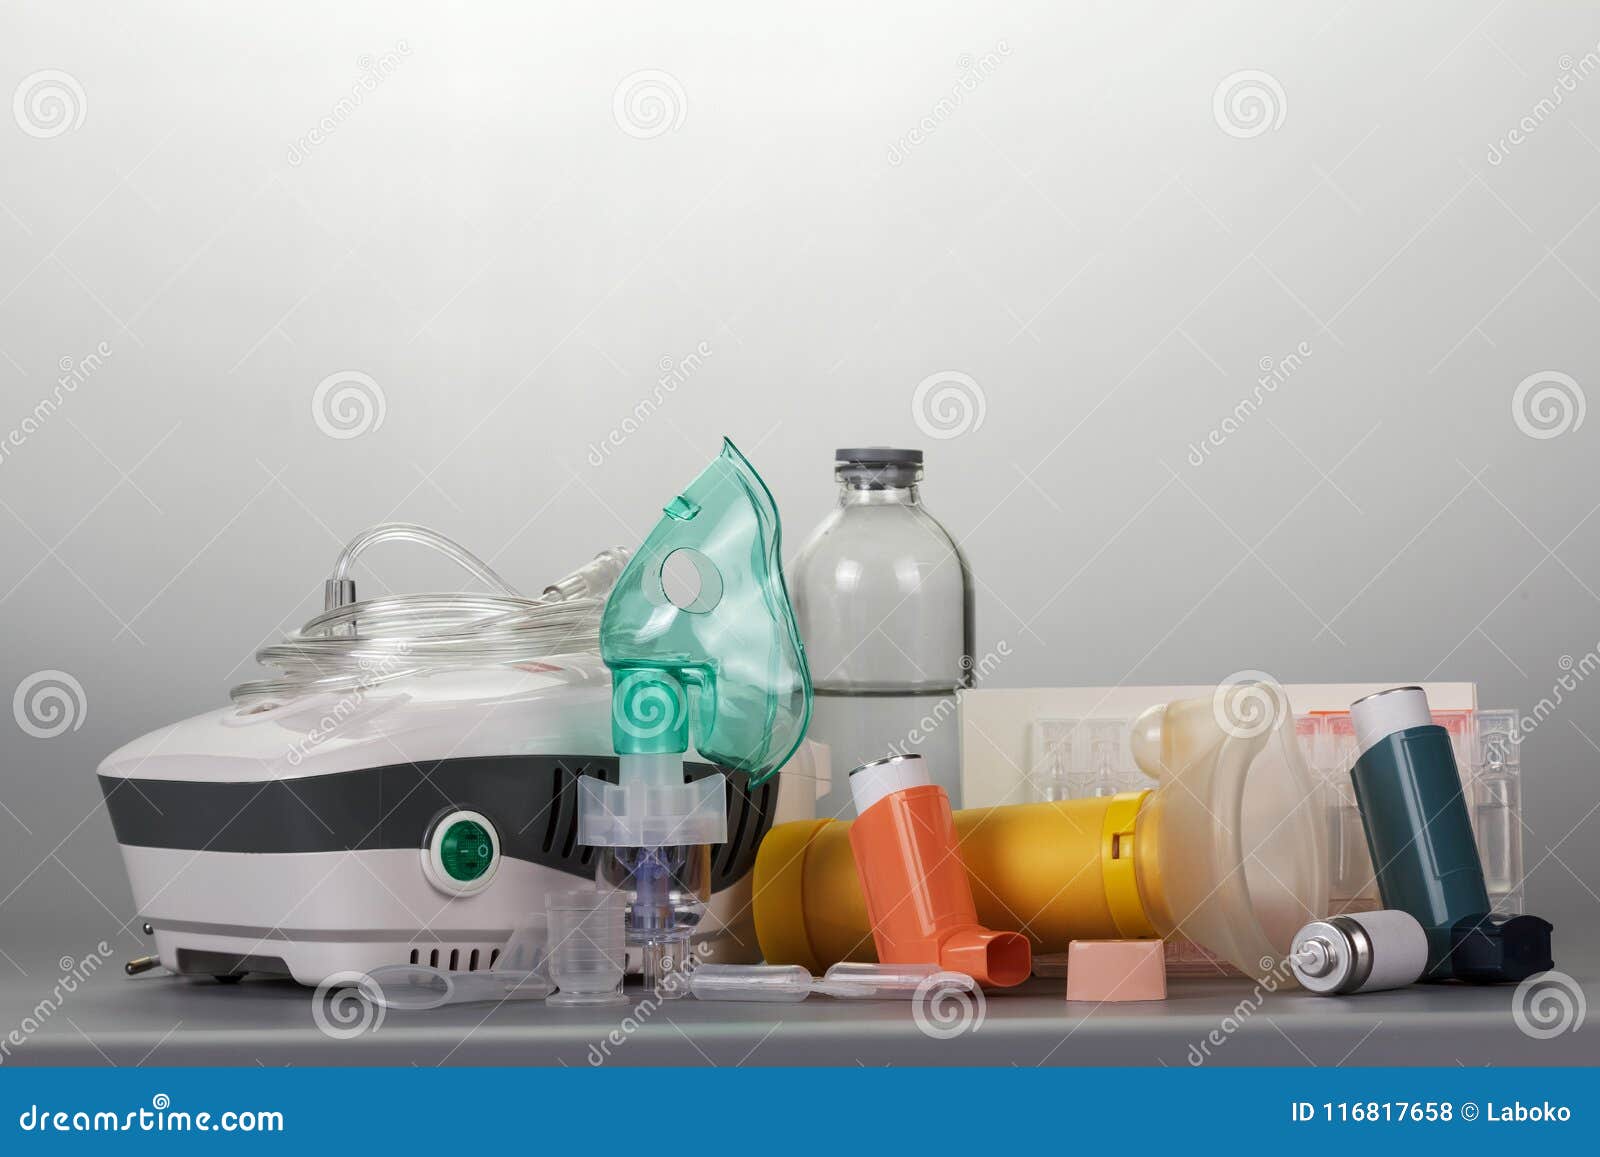 compressor and portable inhalers, replaceable dispenser, ampoules and baby mask, on grey